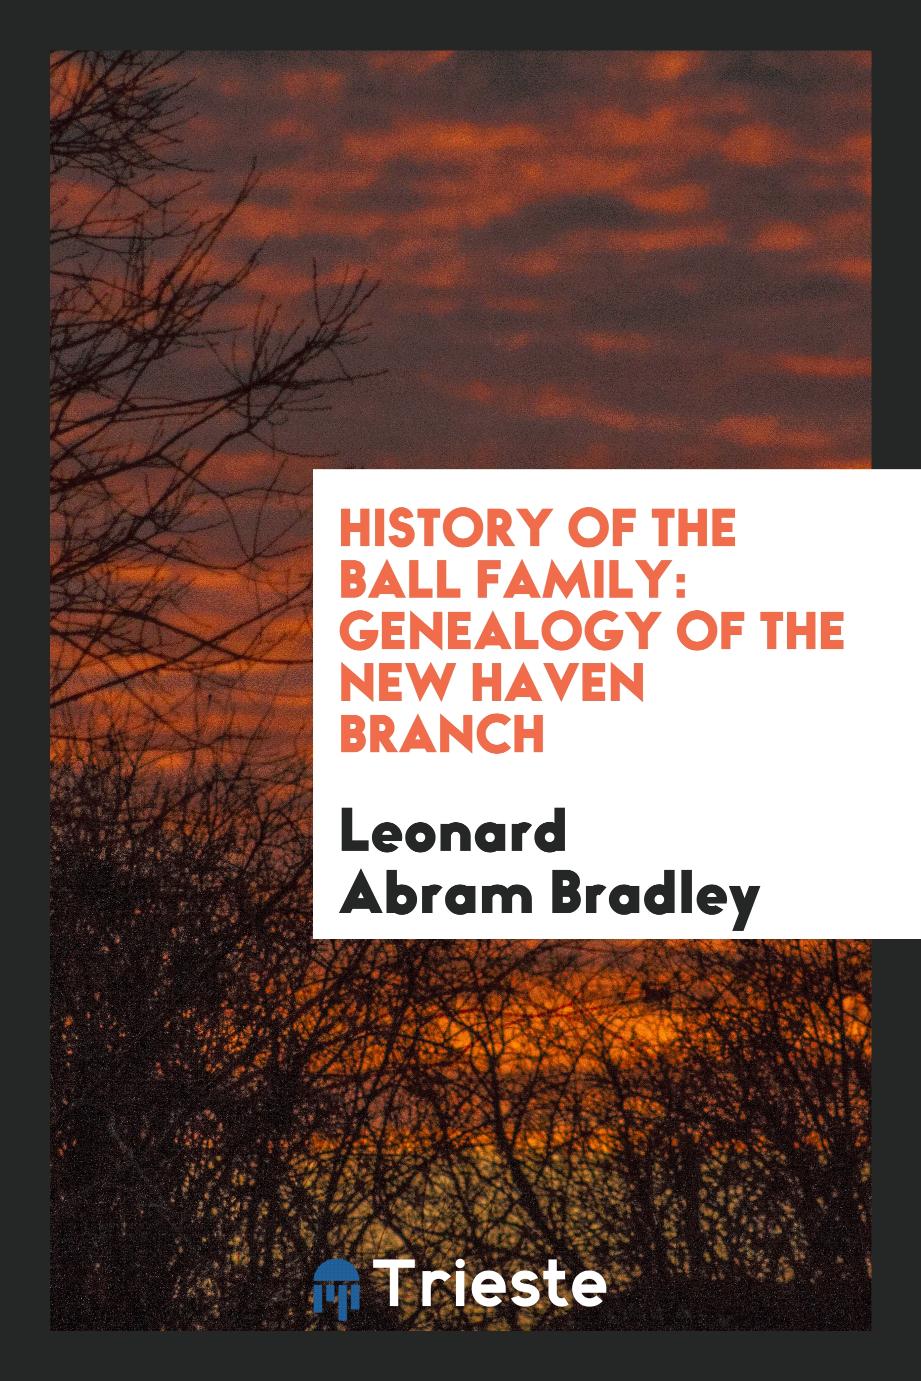 History of the Ball Family: Genealogy of the New Haven Branch